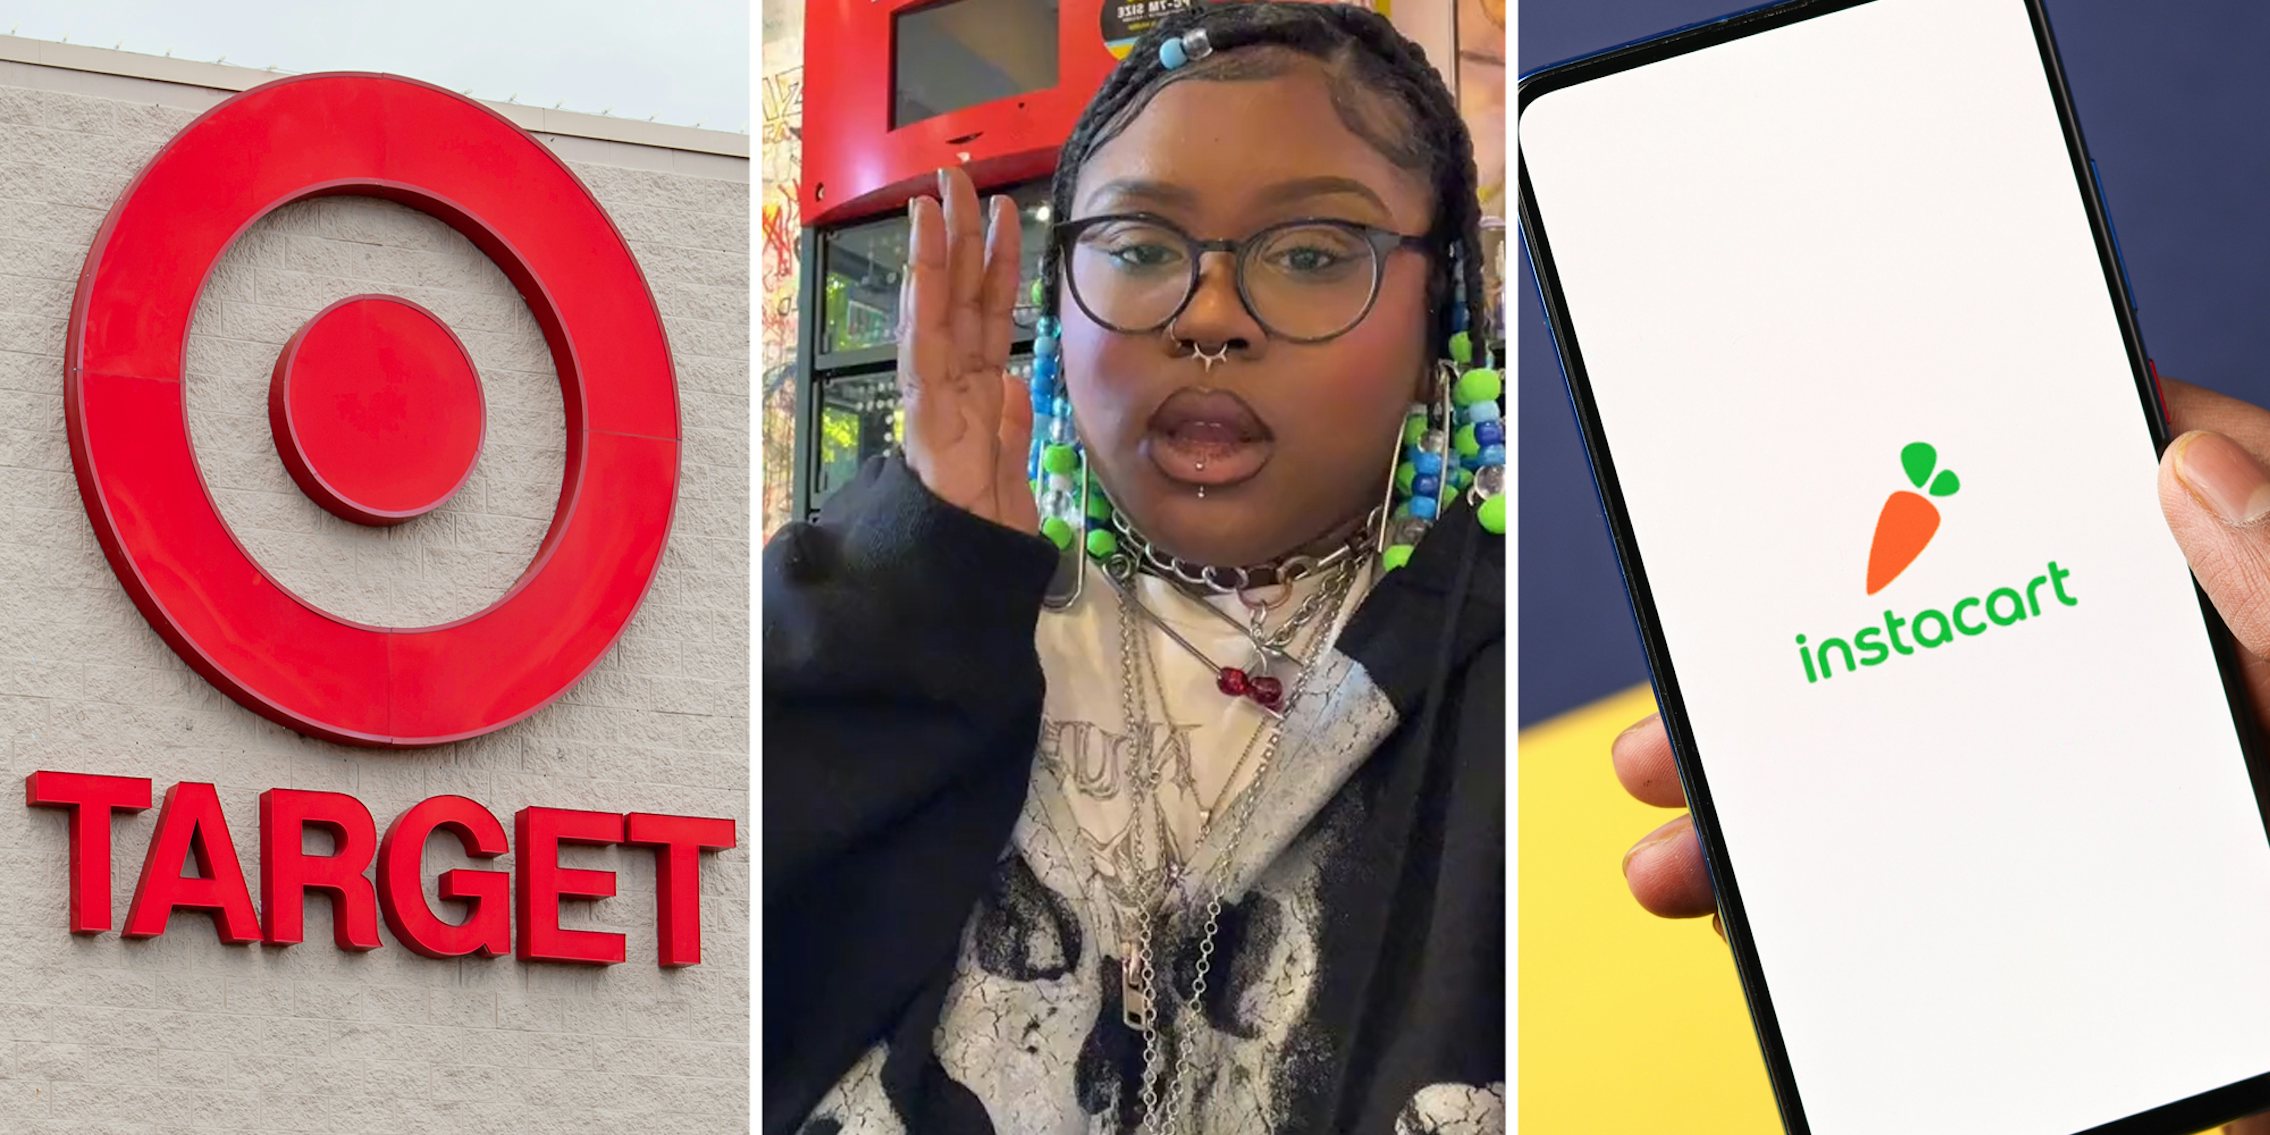 Target storefront(l), Woman talking(c), Hand holding phone with instacart app open(r)